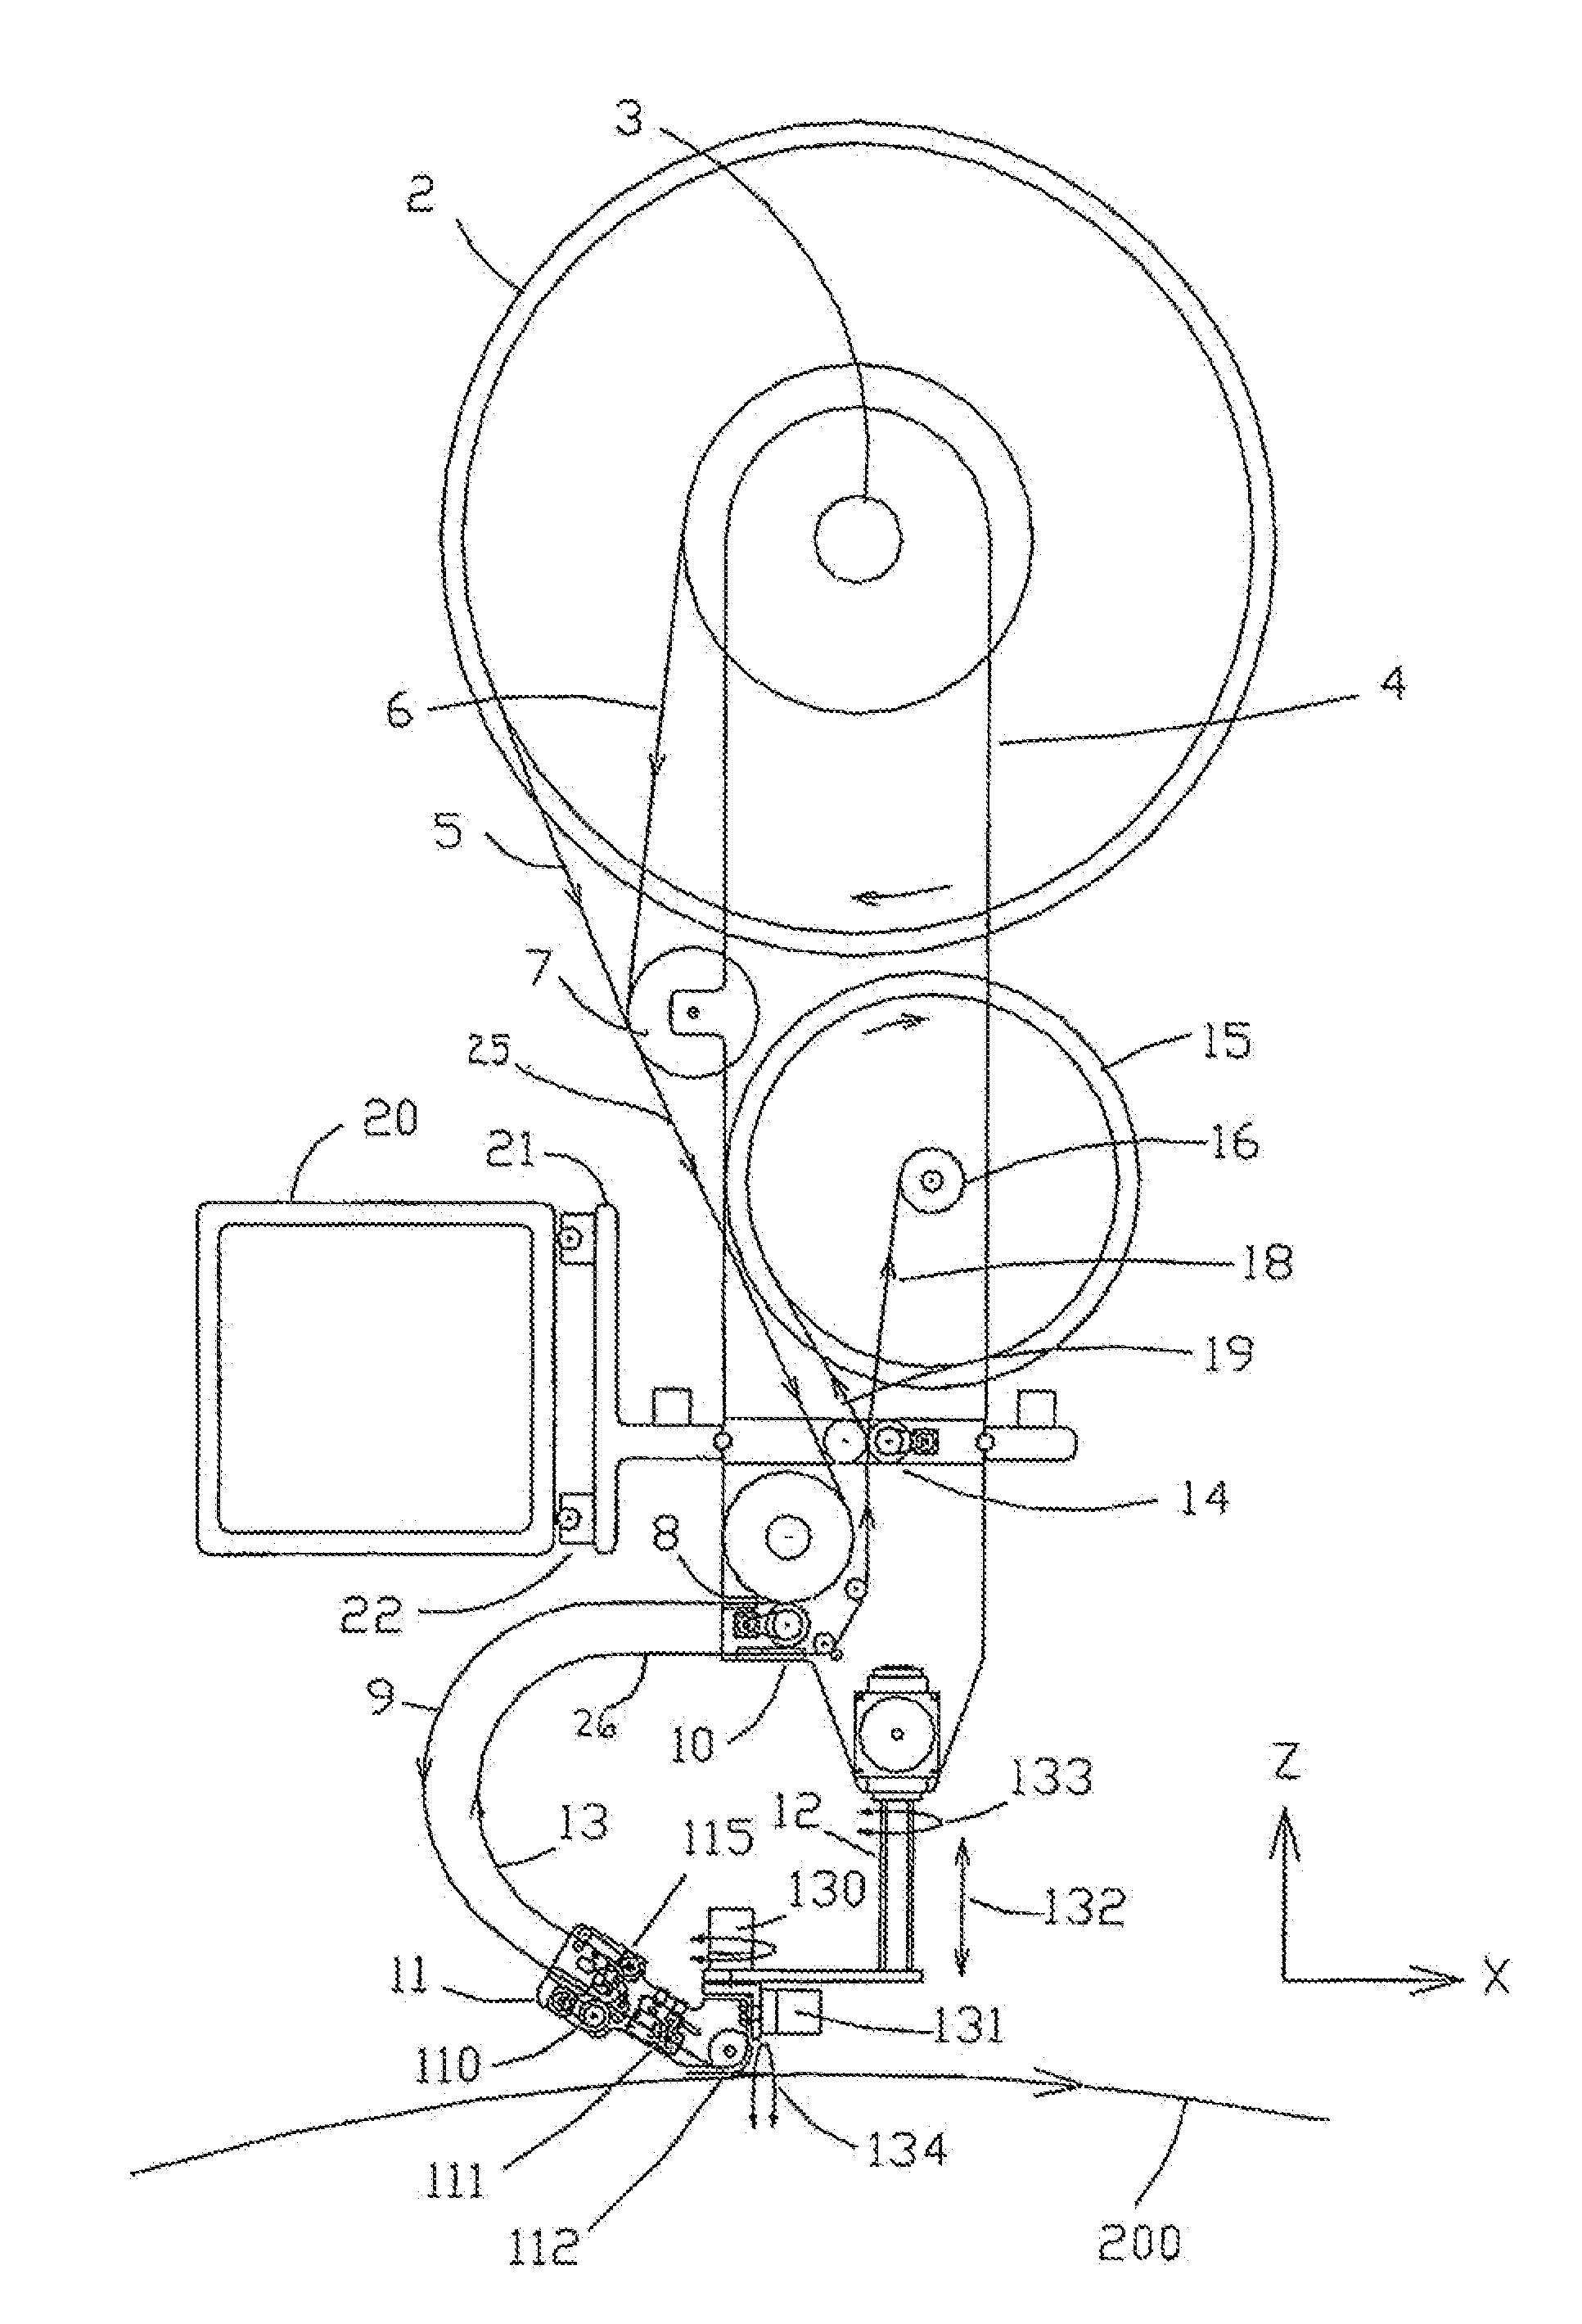 Tape laying apparatus and method